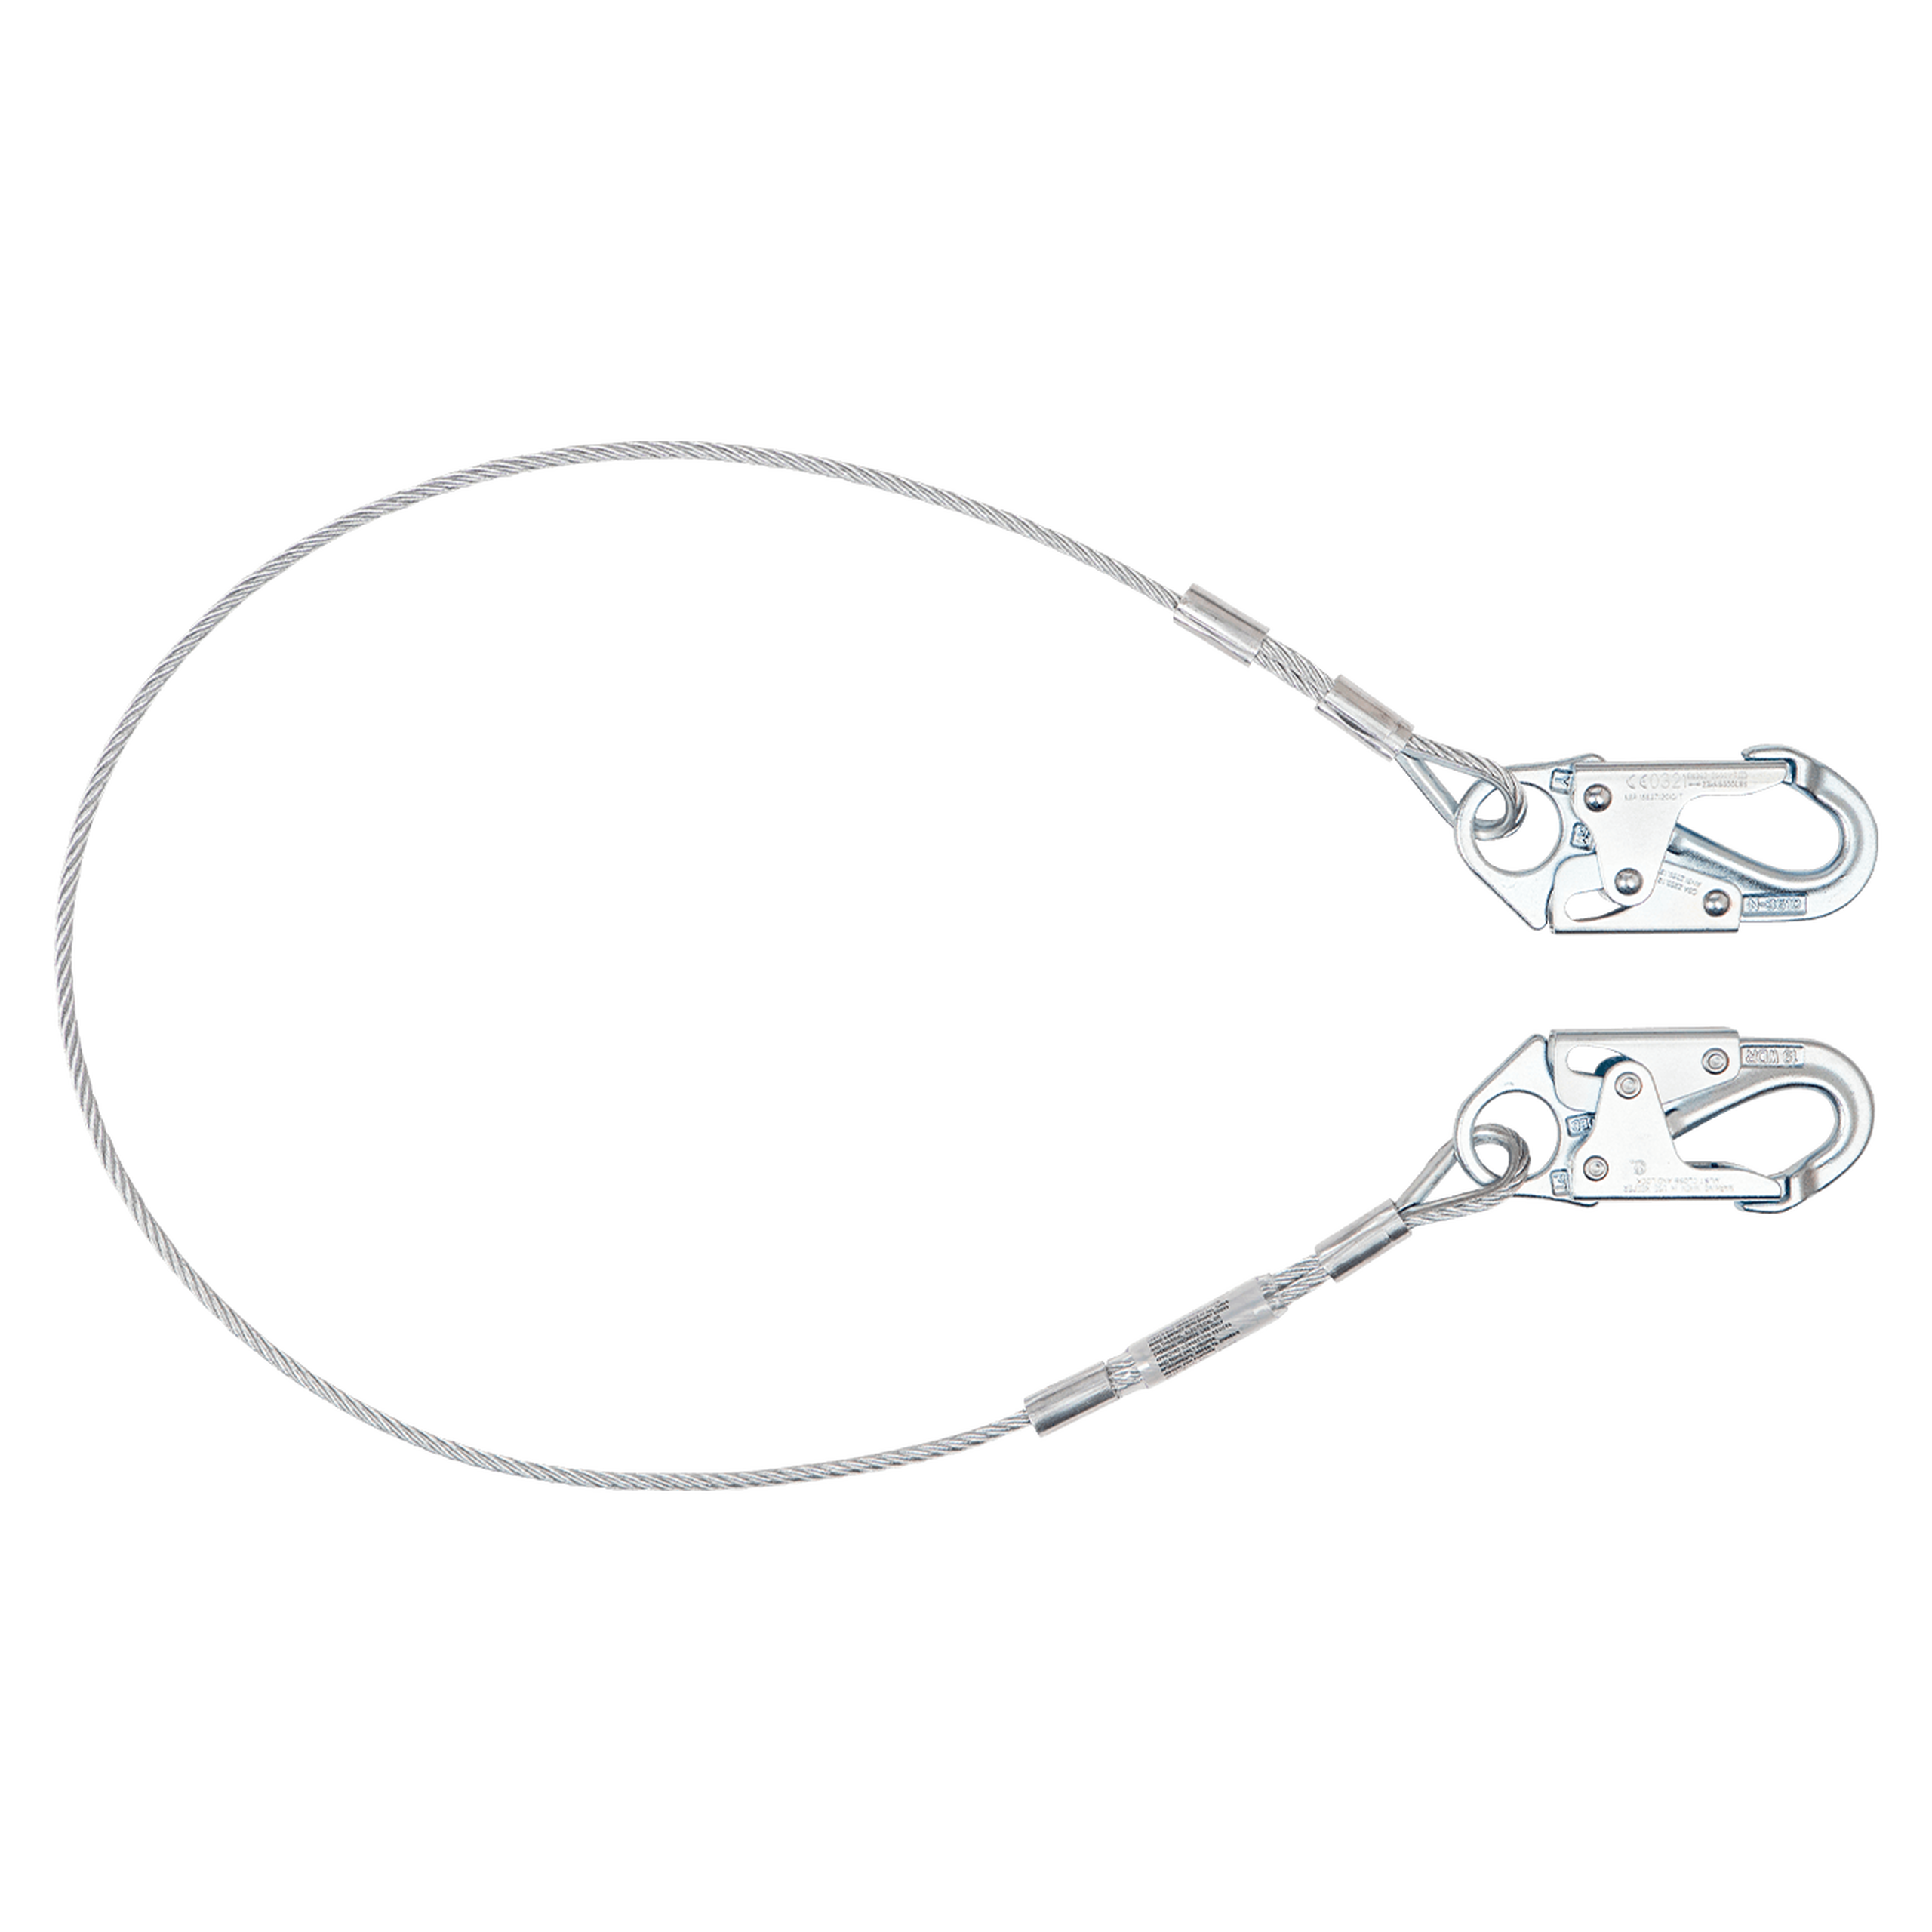 FallTech 830710 10' Coated Cable Restraint Lanyard, Fixed-length with Steel Snap Hooks (each)